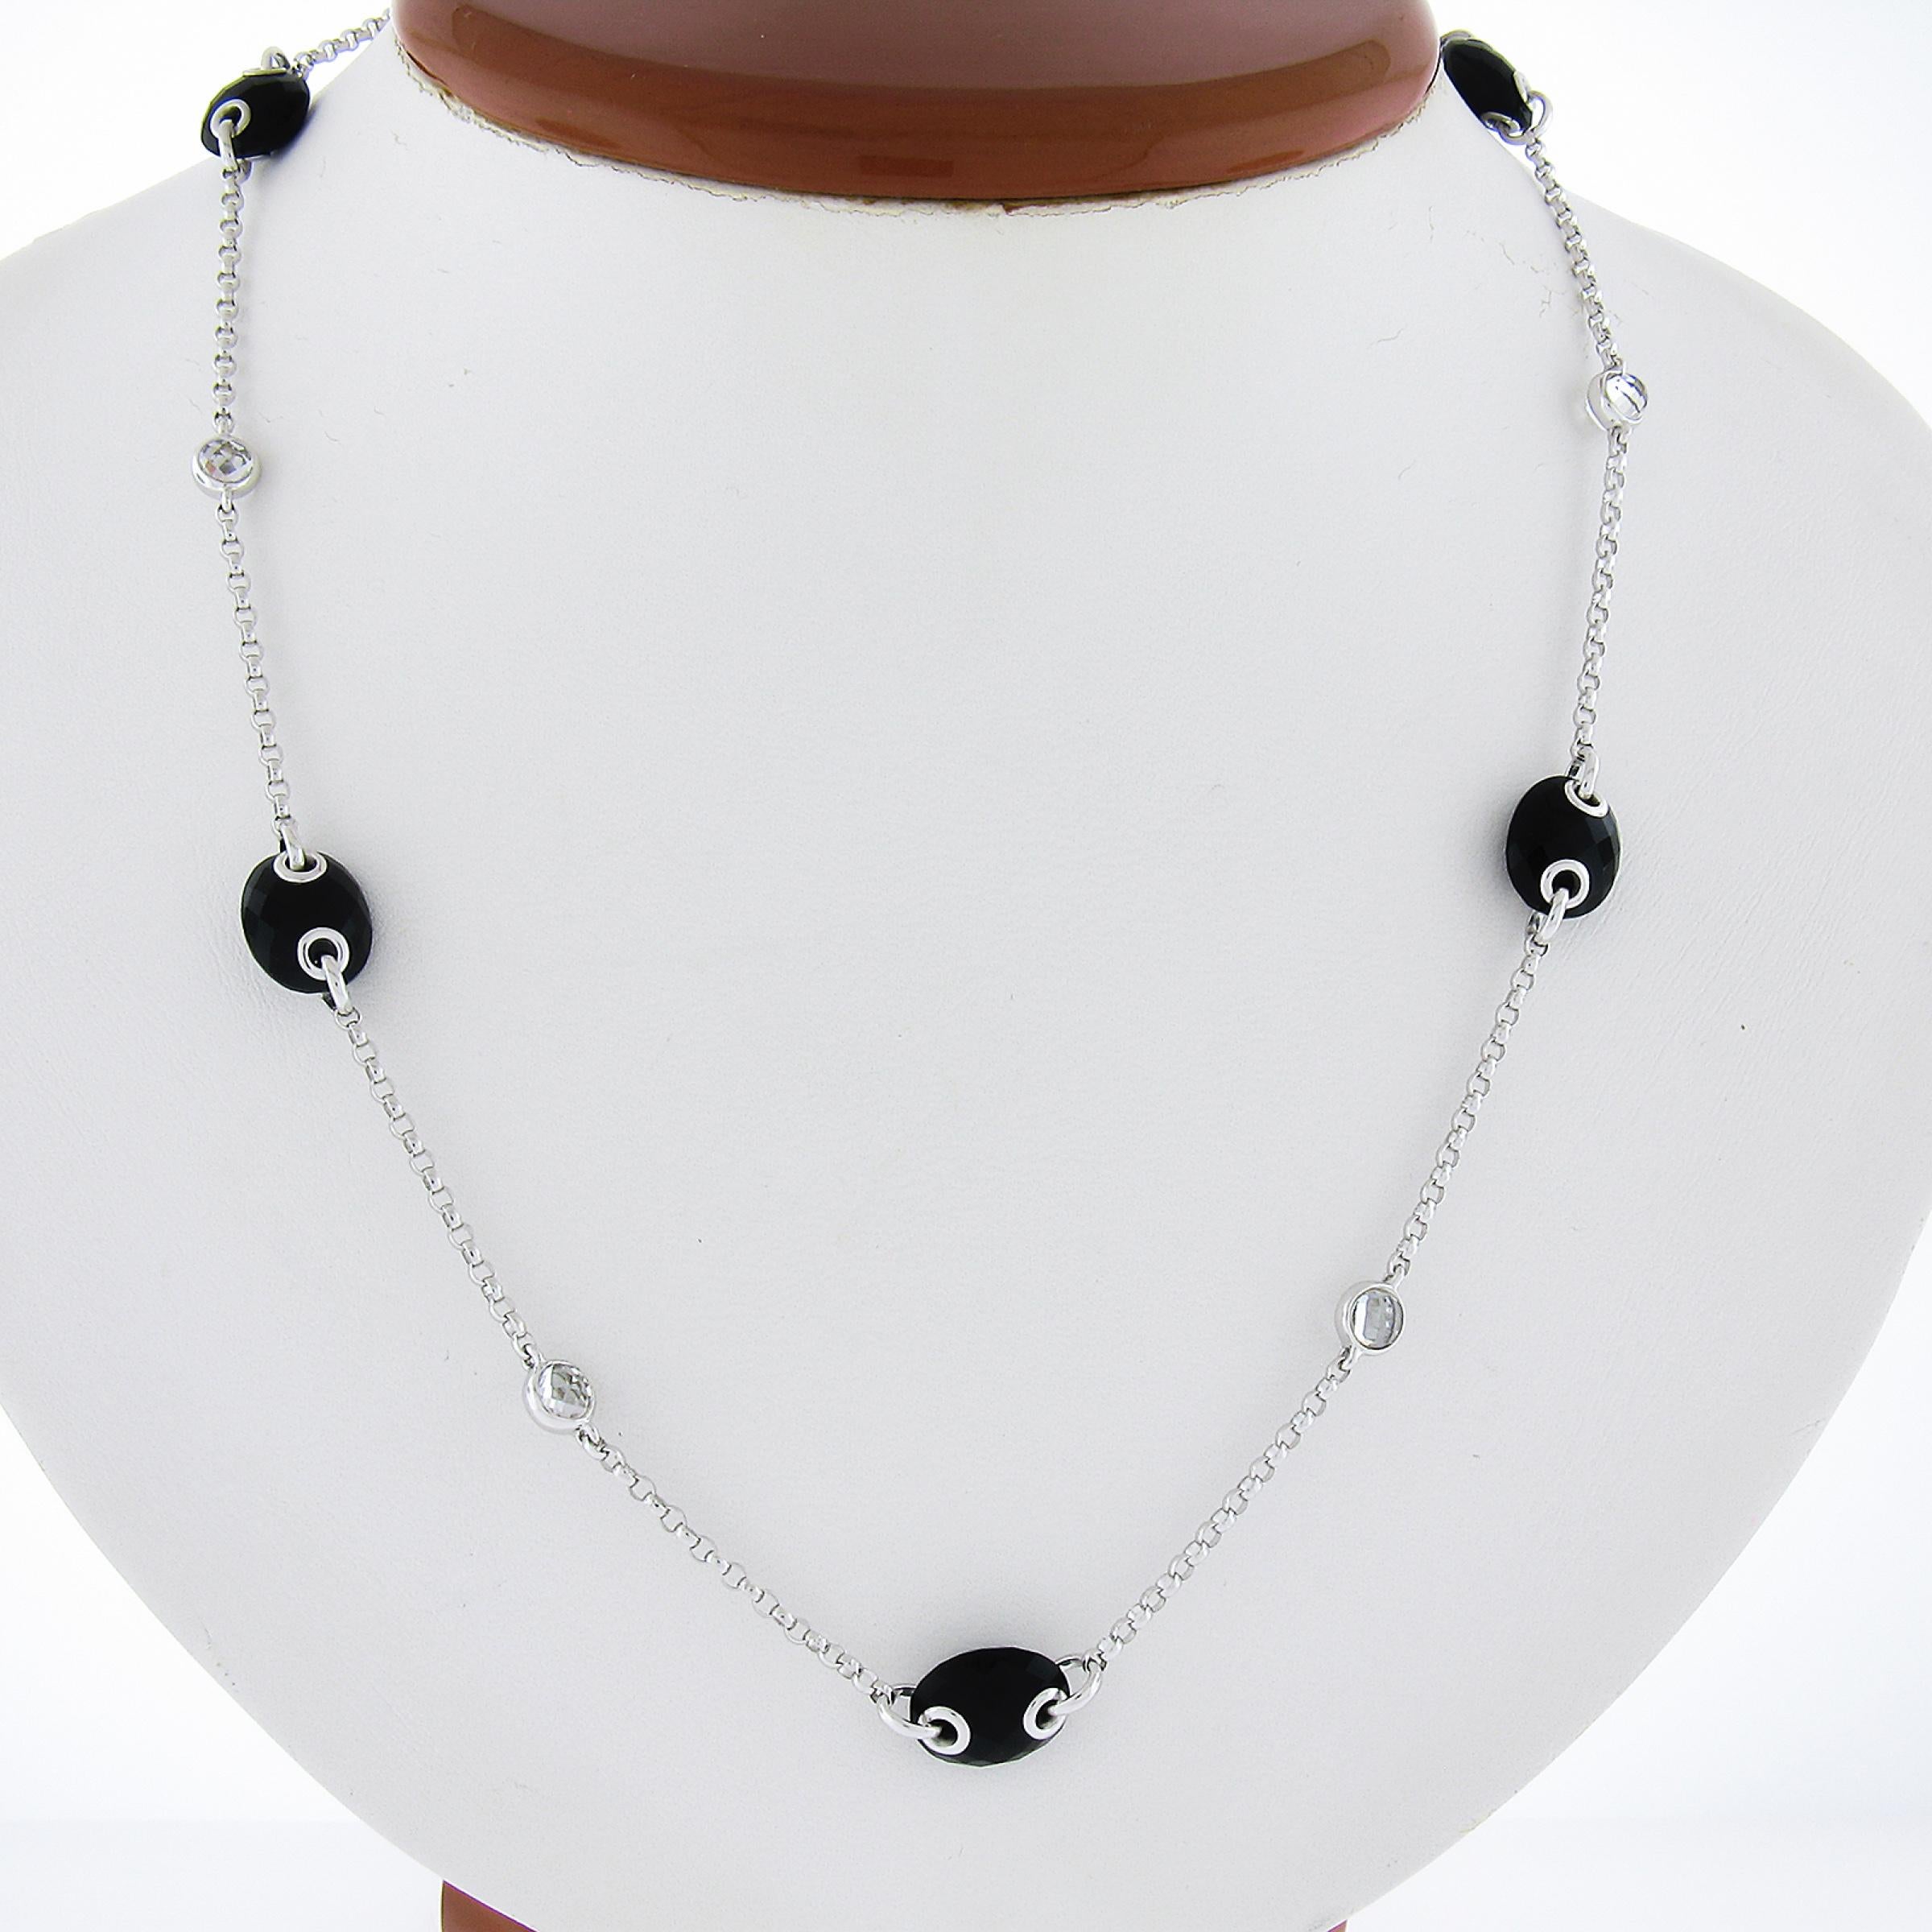 --Stone(s):--
(5) Natural Genuine Black Onyx - Faceted Oval Cut - Black Color - 11.1x8.9mm (approx.) 
(5) Rock Crystal - Faceted Round Cut - Bezel Set - Transparent Color - 3.8mm (approx.)

Material: 18k Solid White Gold
Weight: 12.09 Grams
Chain